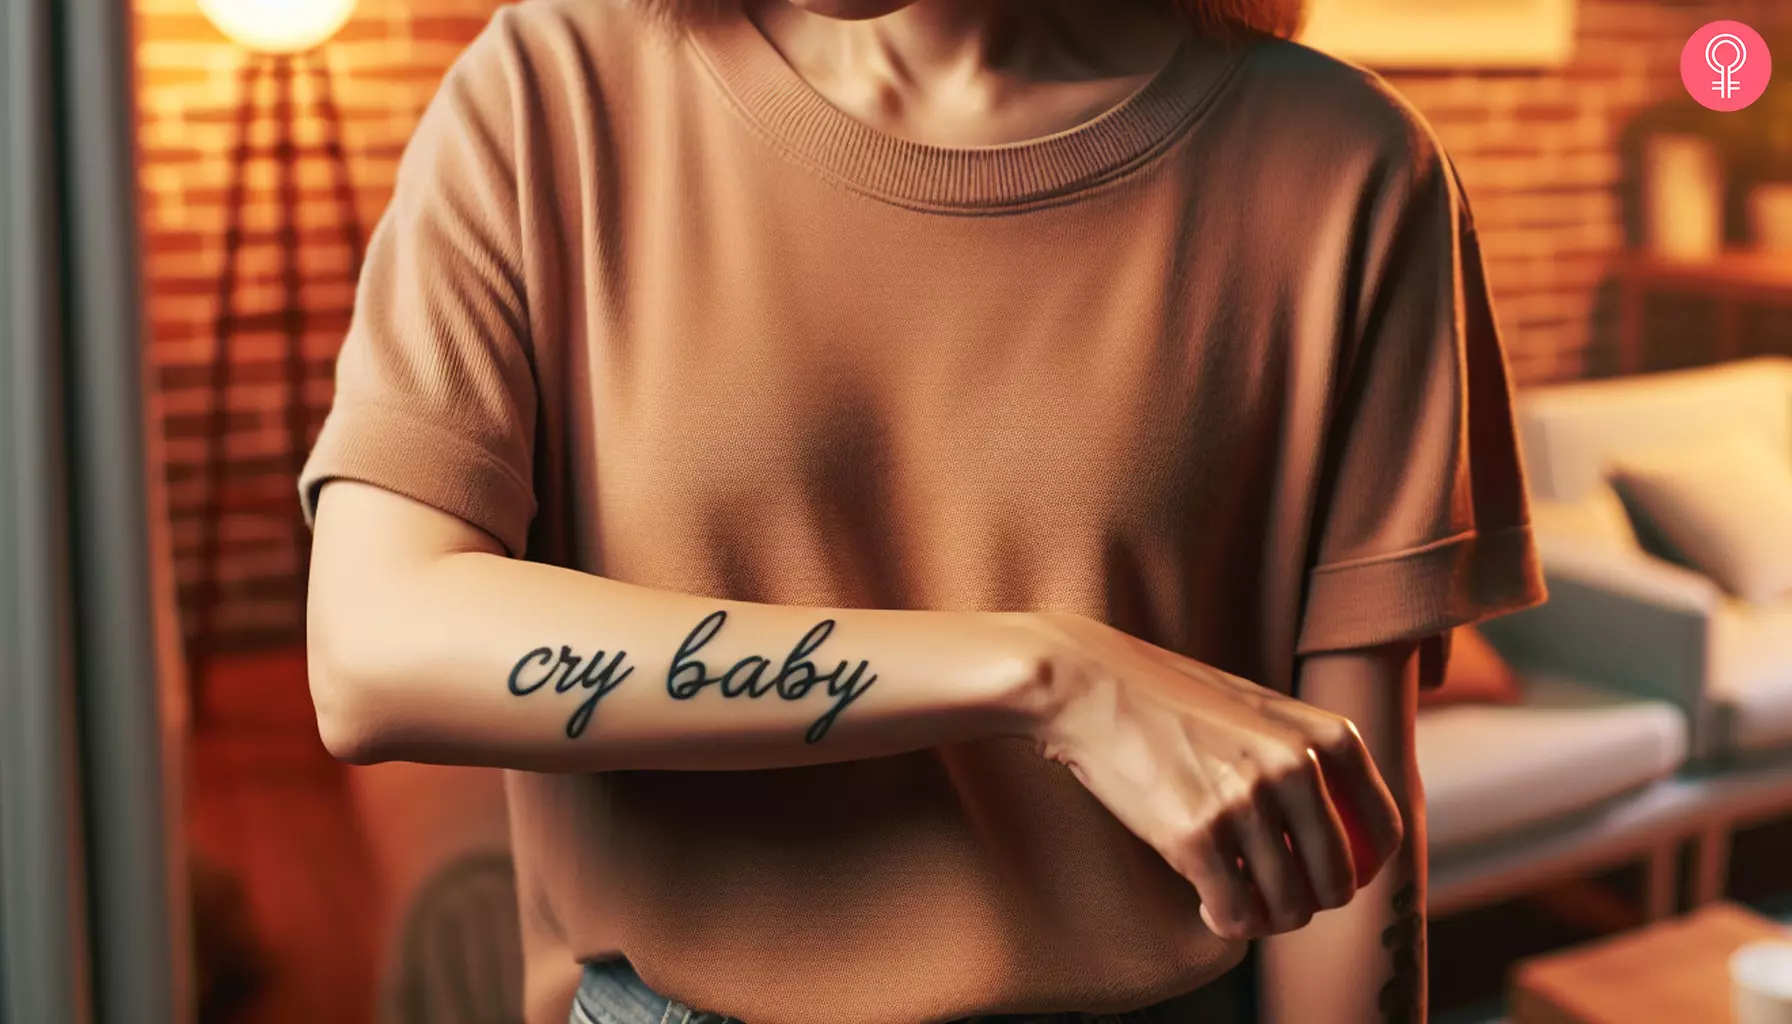 Cursive Cry Baby tattoo on the forearm